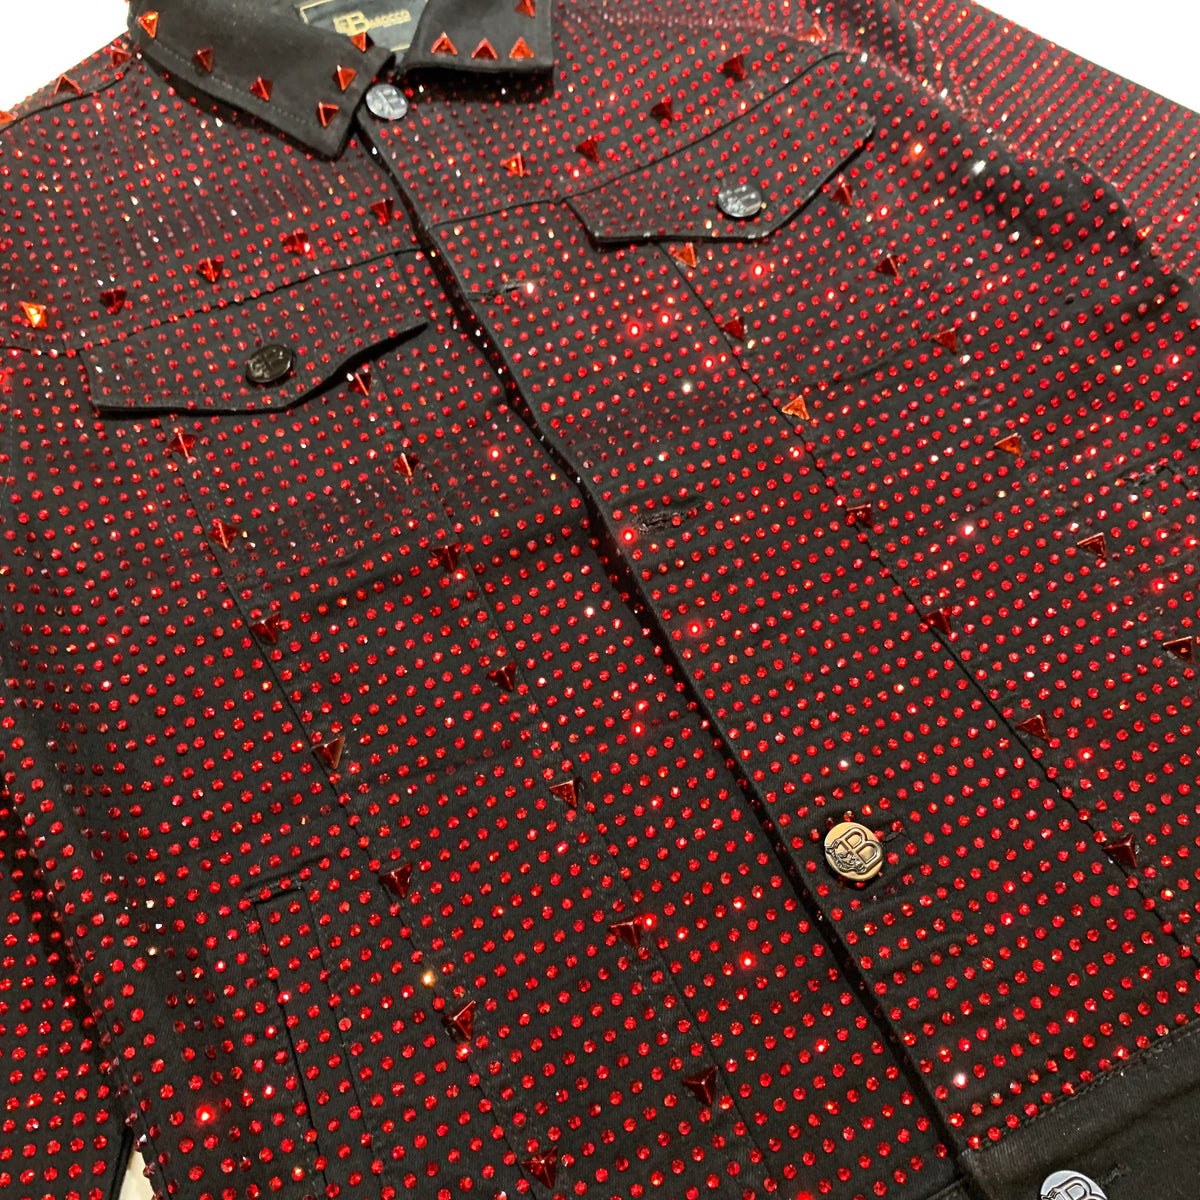 Barocco Black Fully Loaded Red Crystal Spiked Jean Jacket - Dudes Boutique